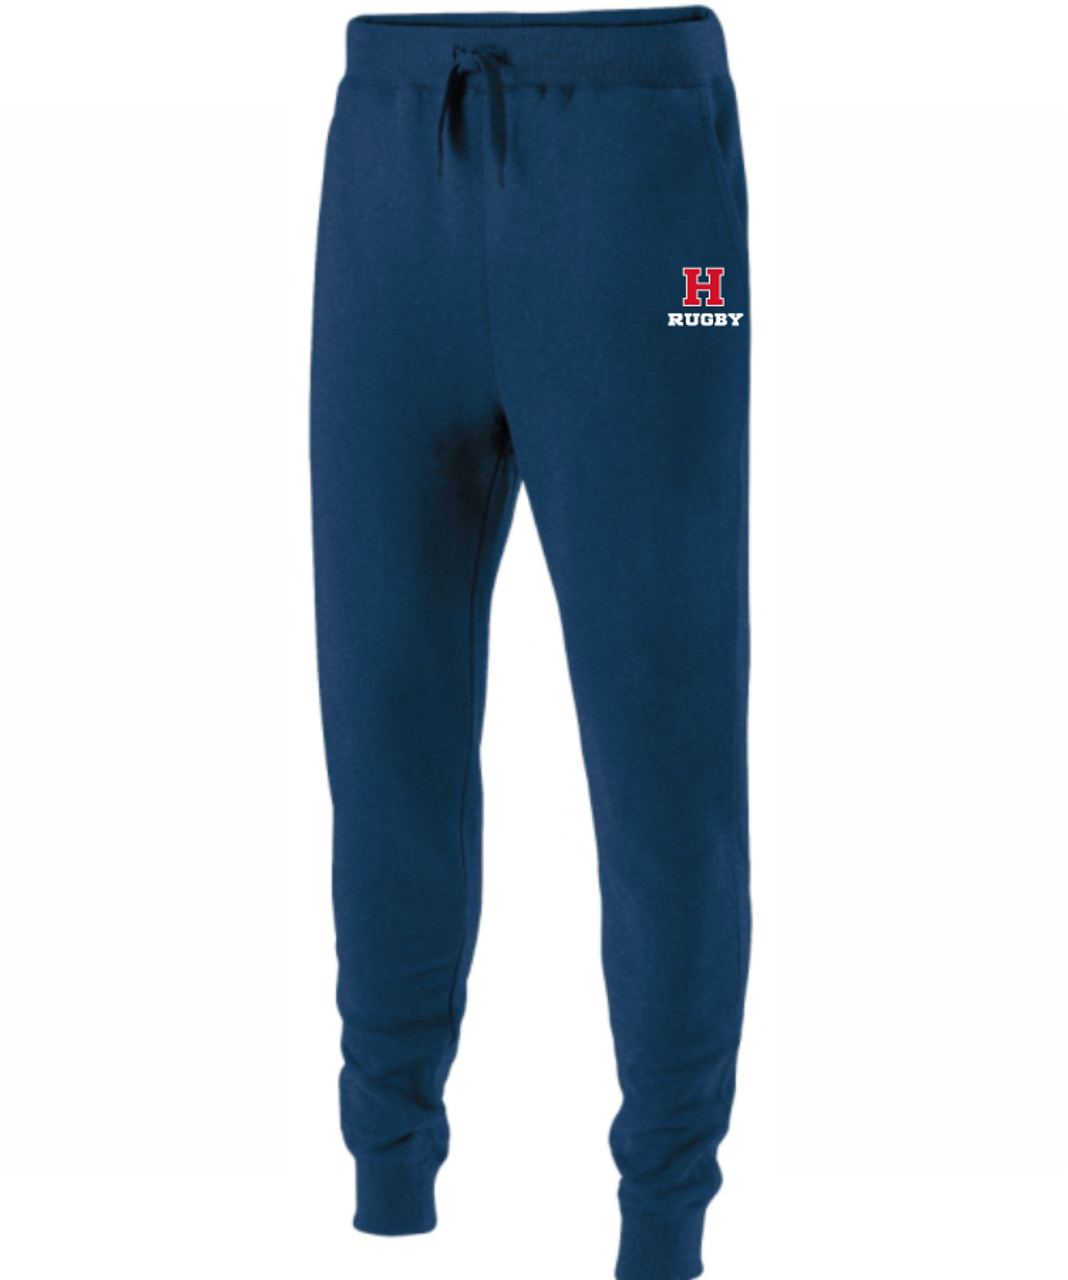 Howard University Rugby Joggers